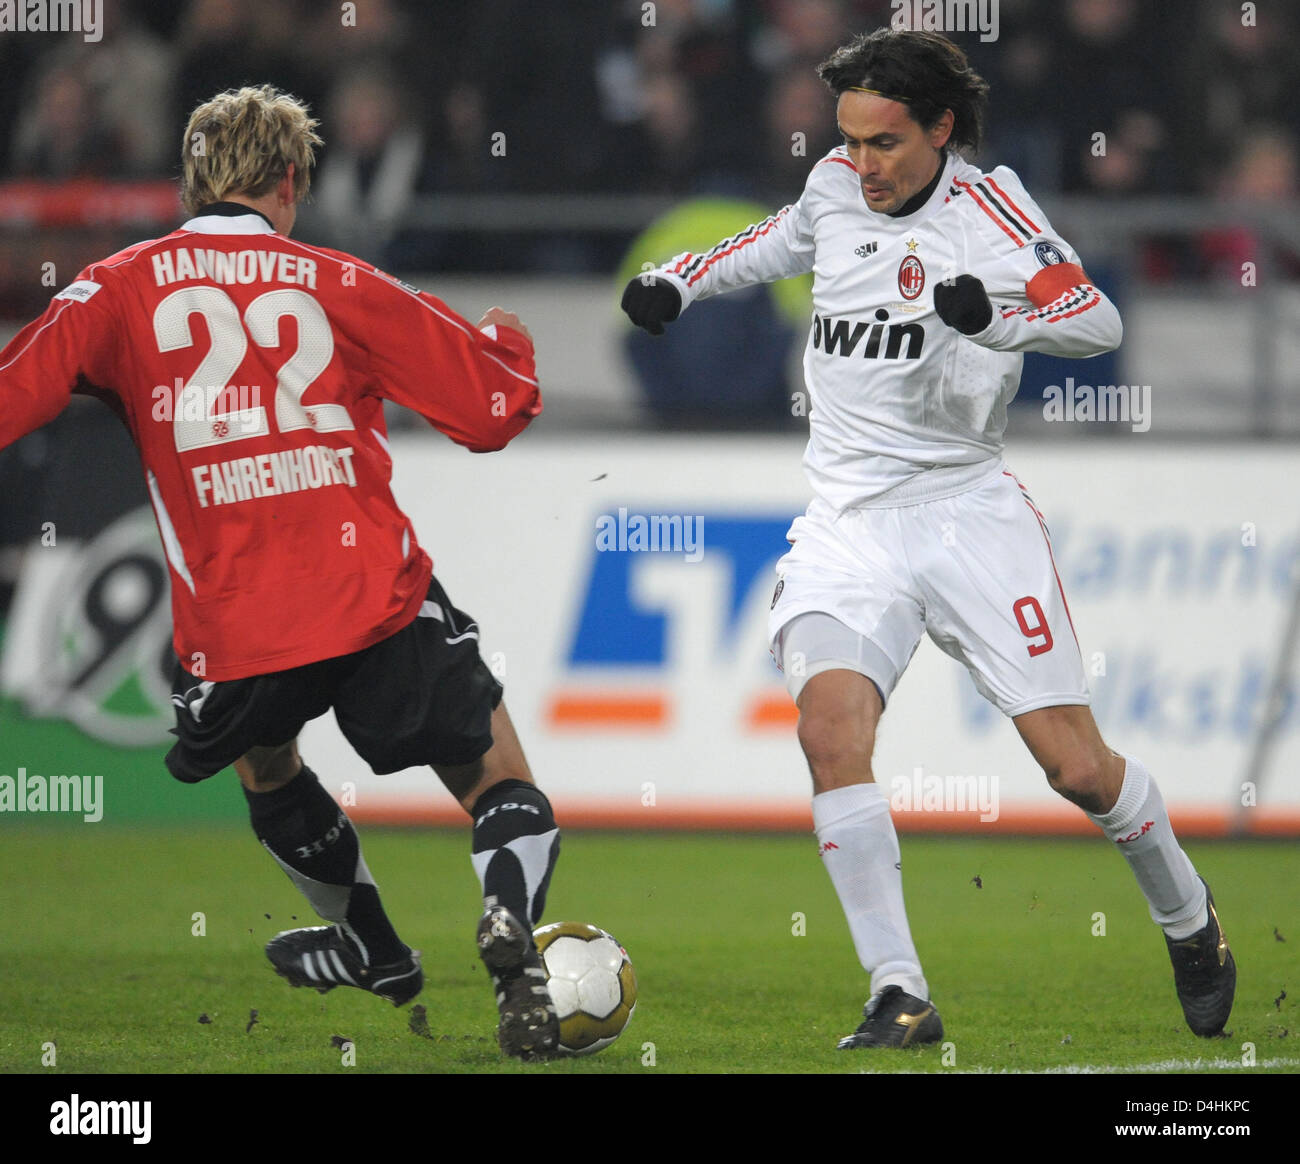 Hanover?s Frank Fahrenhorst (L) vies for the ball with Milan?s Filippo Inzaghi during the soccer friendly between German Bundesliga club Hanover 96 and Italian Serie A club AC Milan at AWD-Arena in Hanover, Germany, 21 January 2009. AC Milan defeated Hanover 3-2. Photo: Peter Steffen Stock Photo